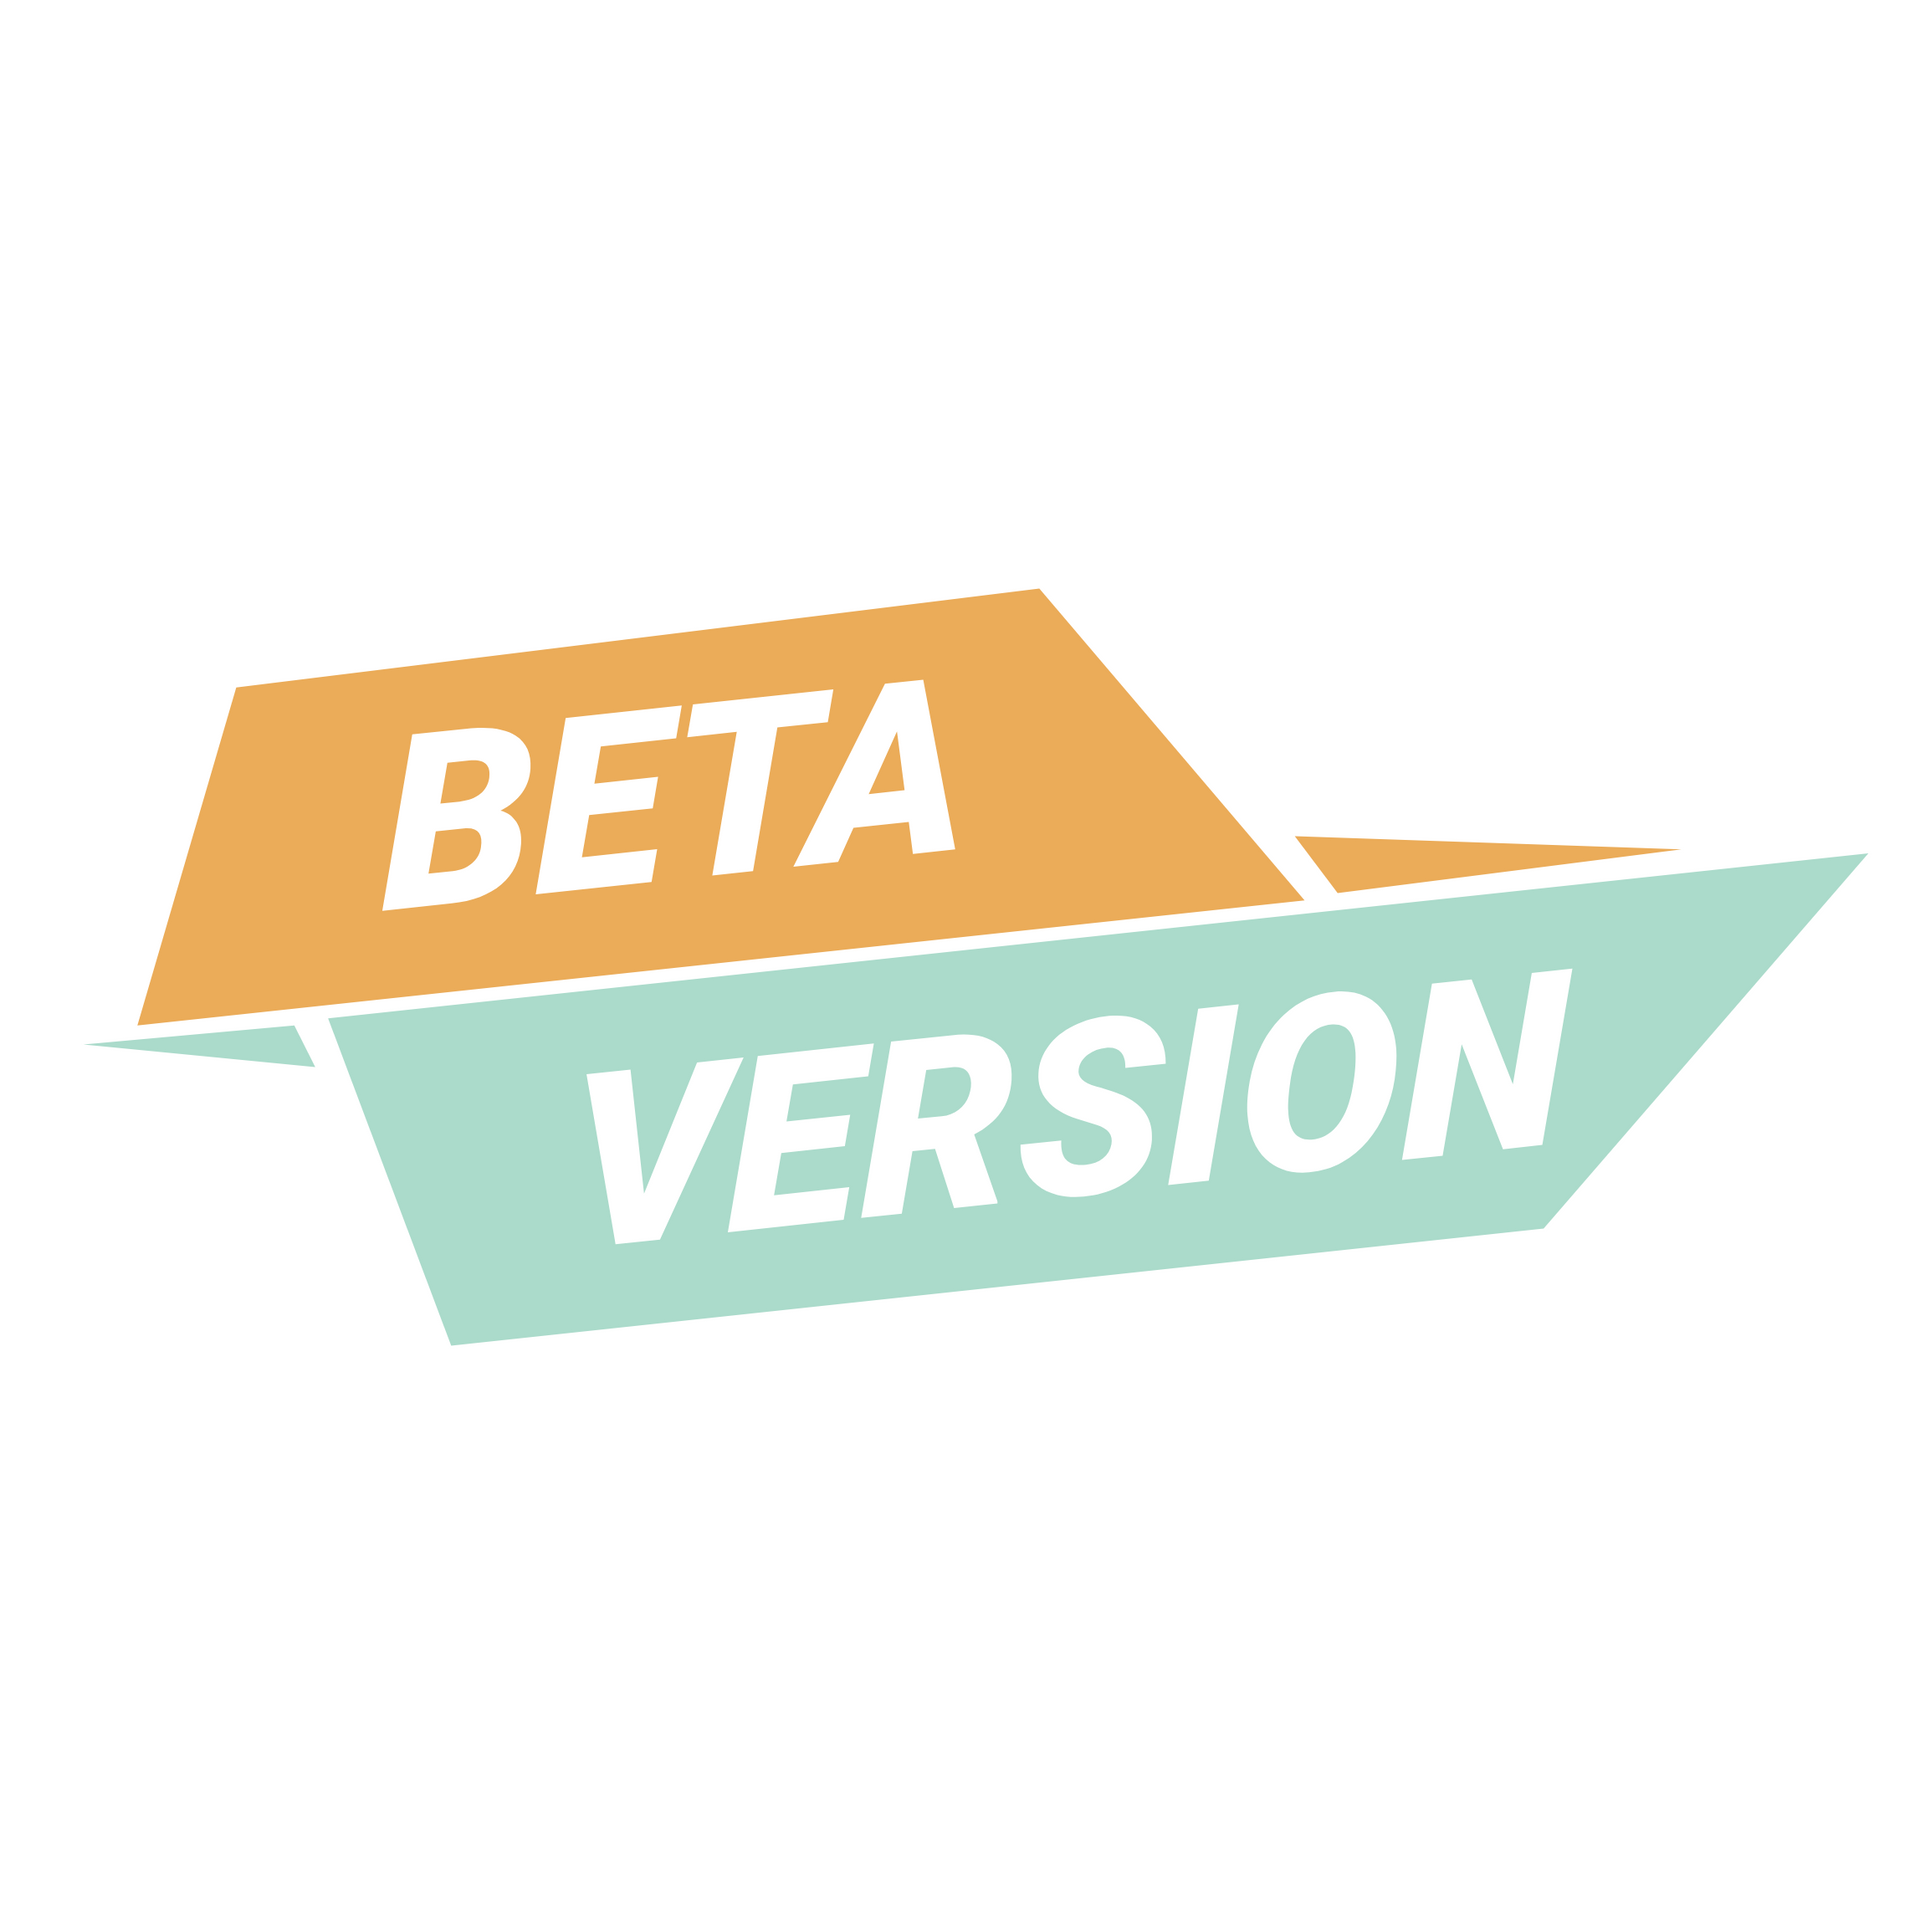 A beta version logo is shown on a white background.